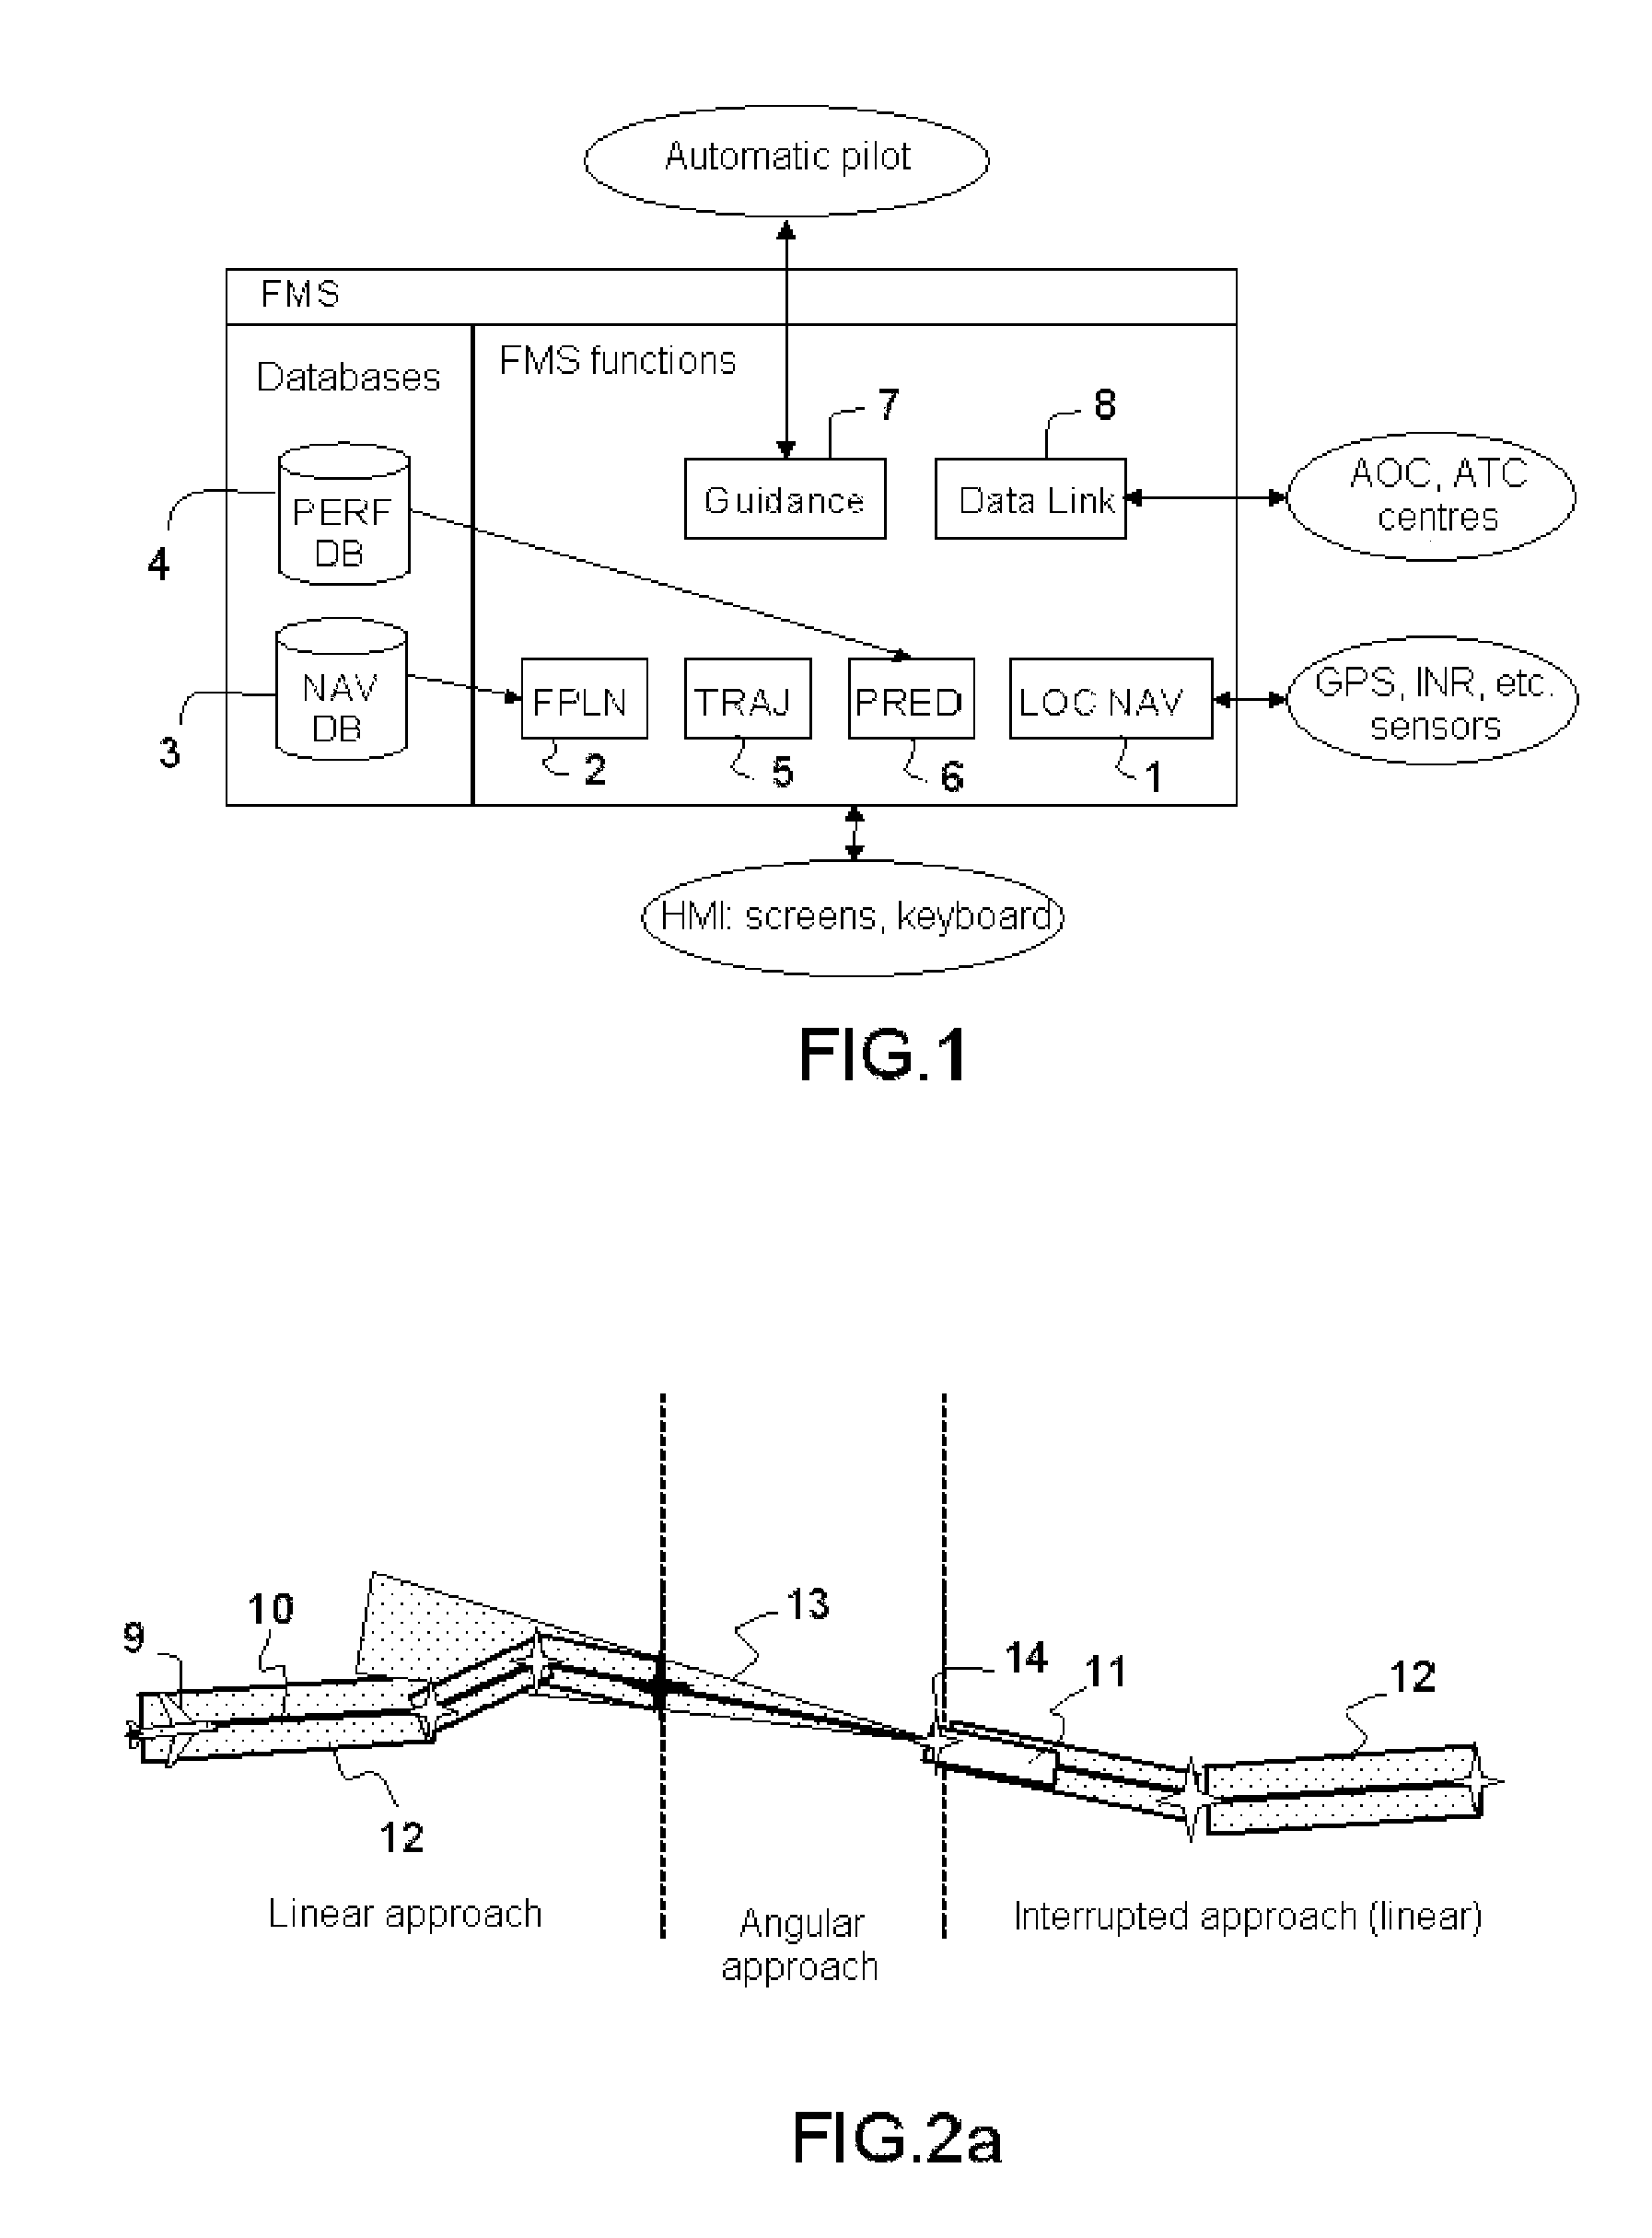 Navigation assistance method based on anticipation of linear or angular deviations